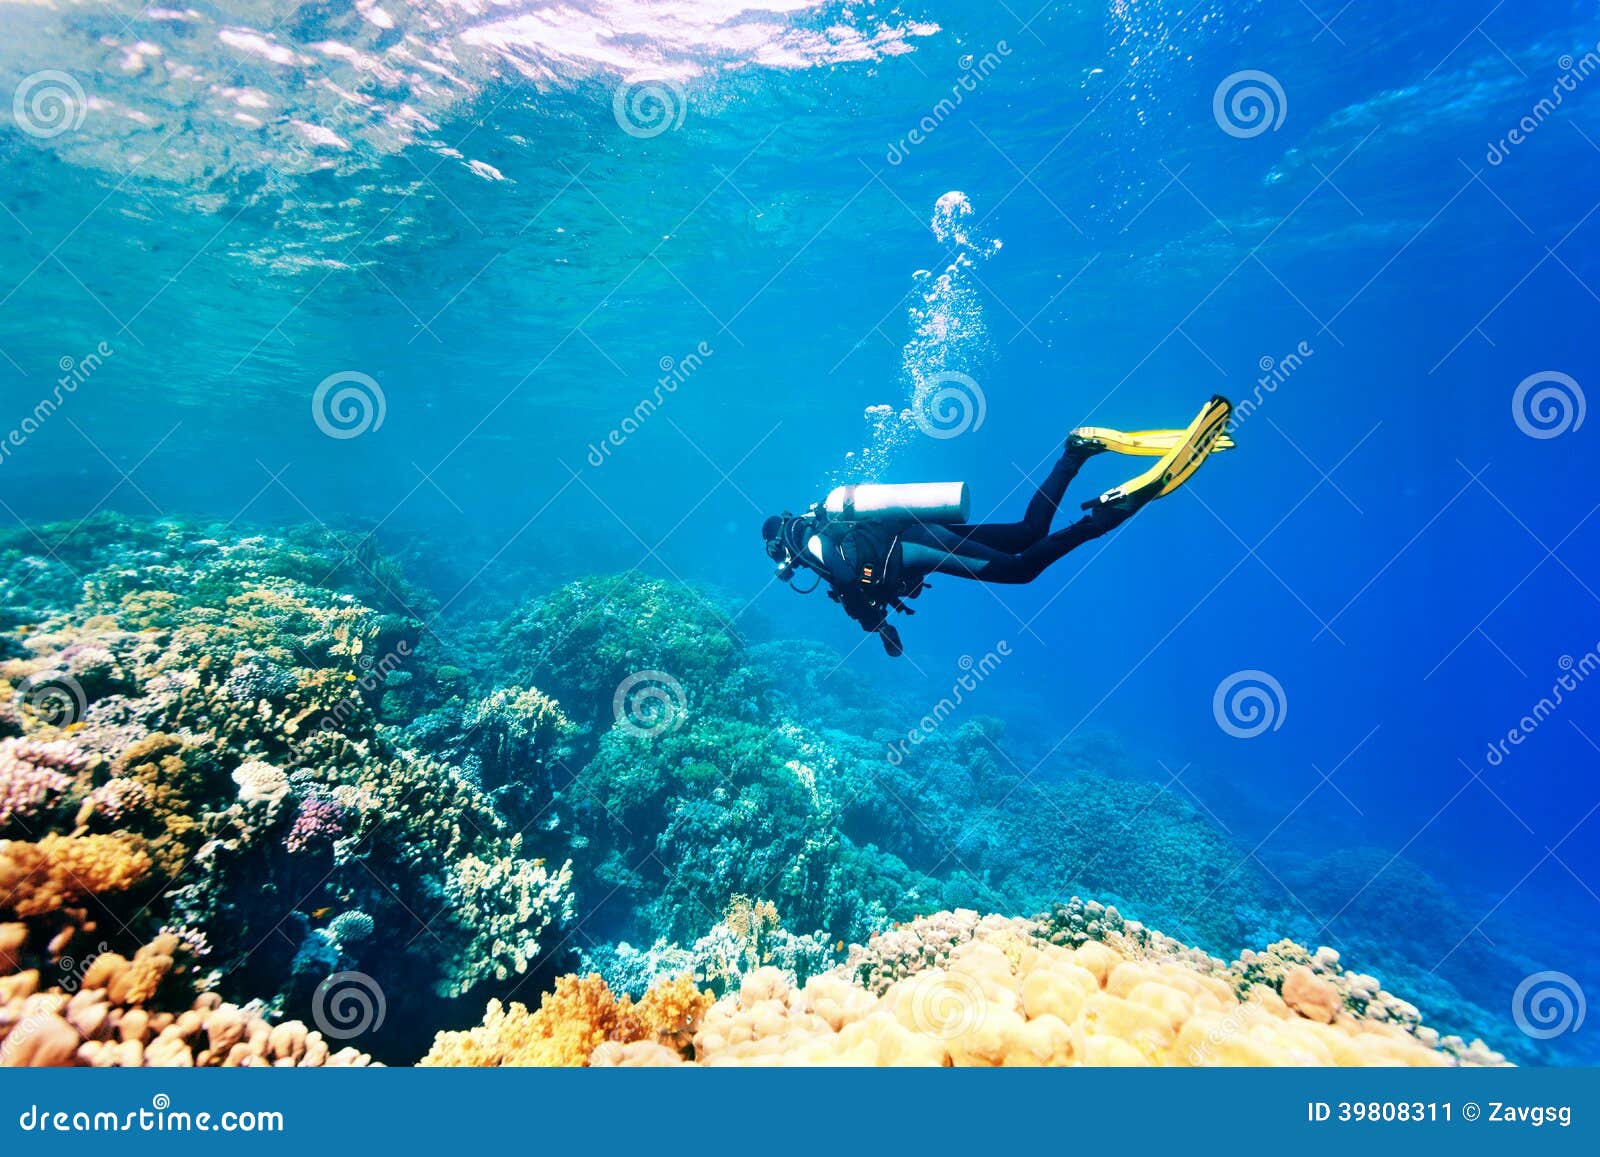 dver swimming under water